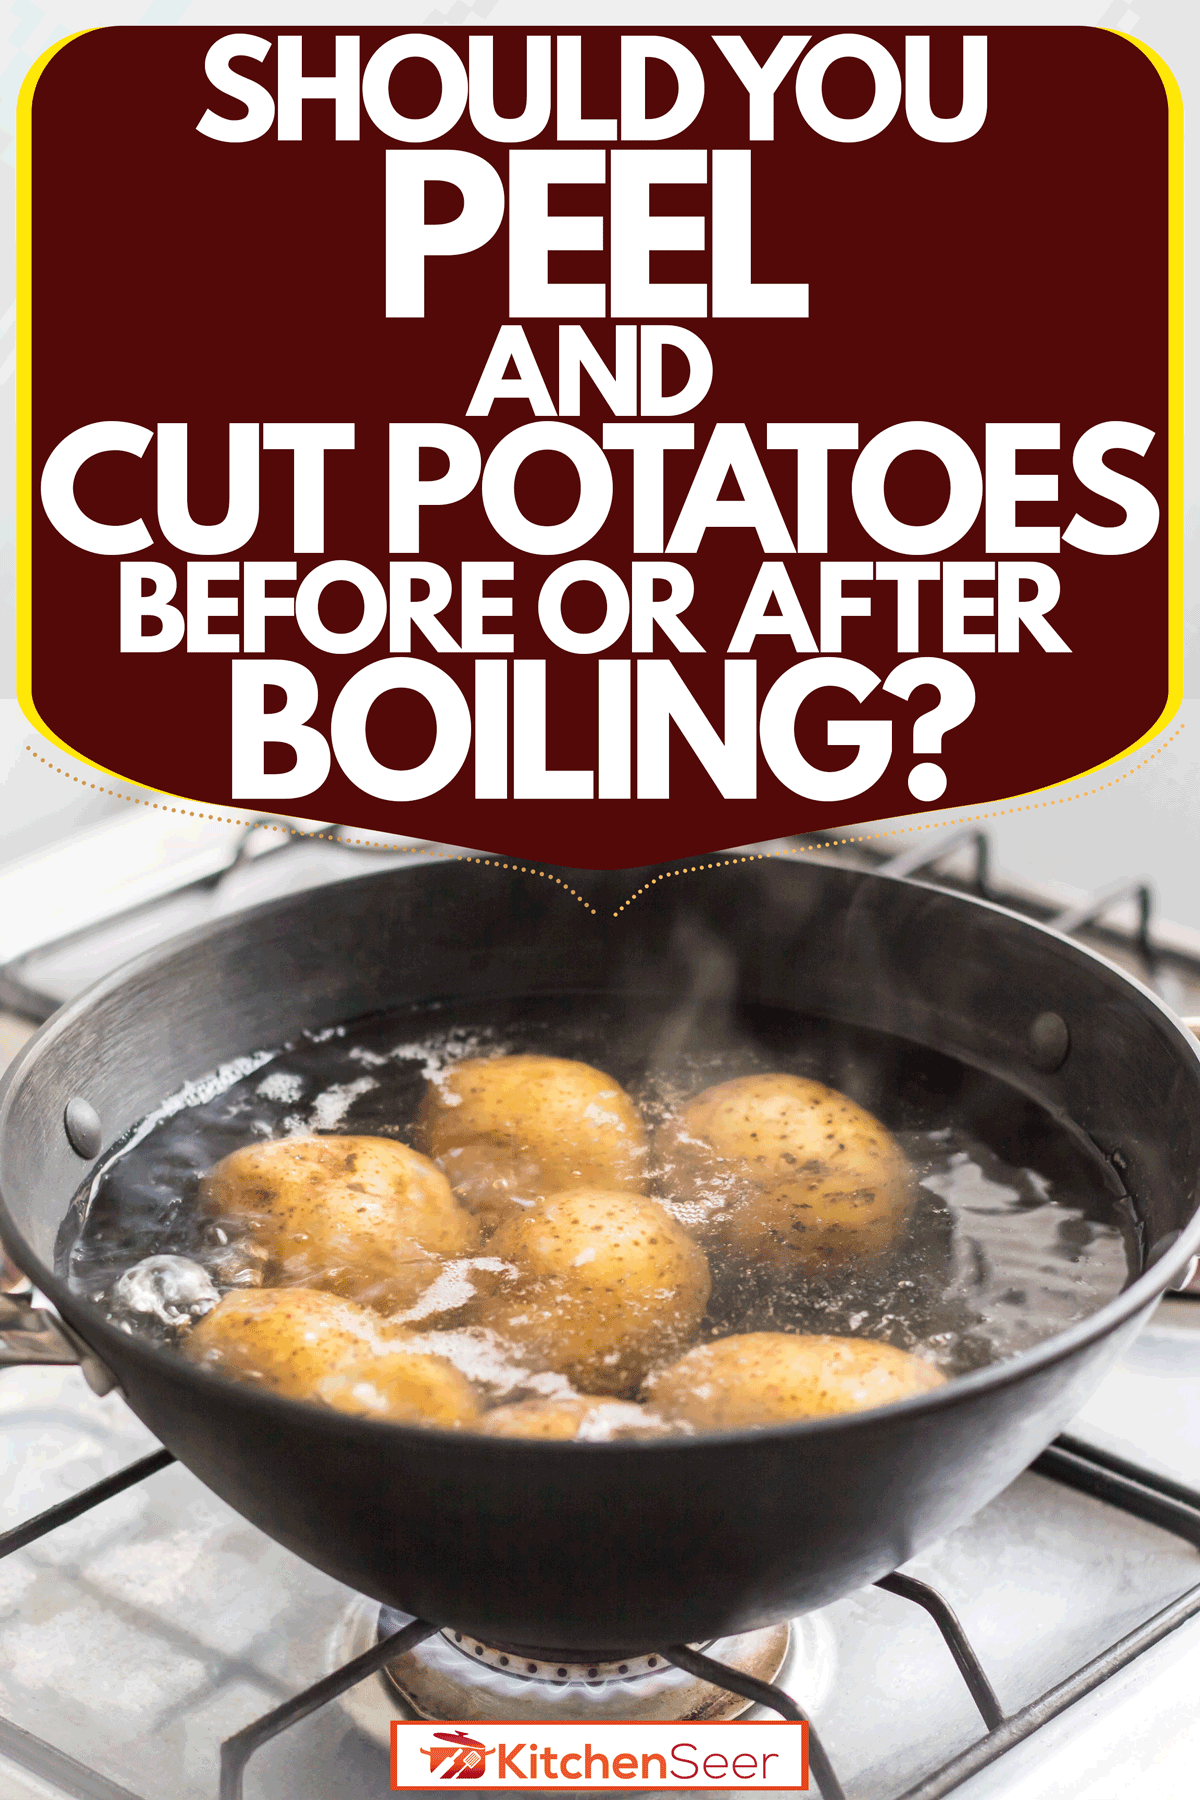 Potatoes placed inside a sauce pan under boiling water, Should You Peel And Cut Potatoes Before Or After Boiling?